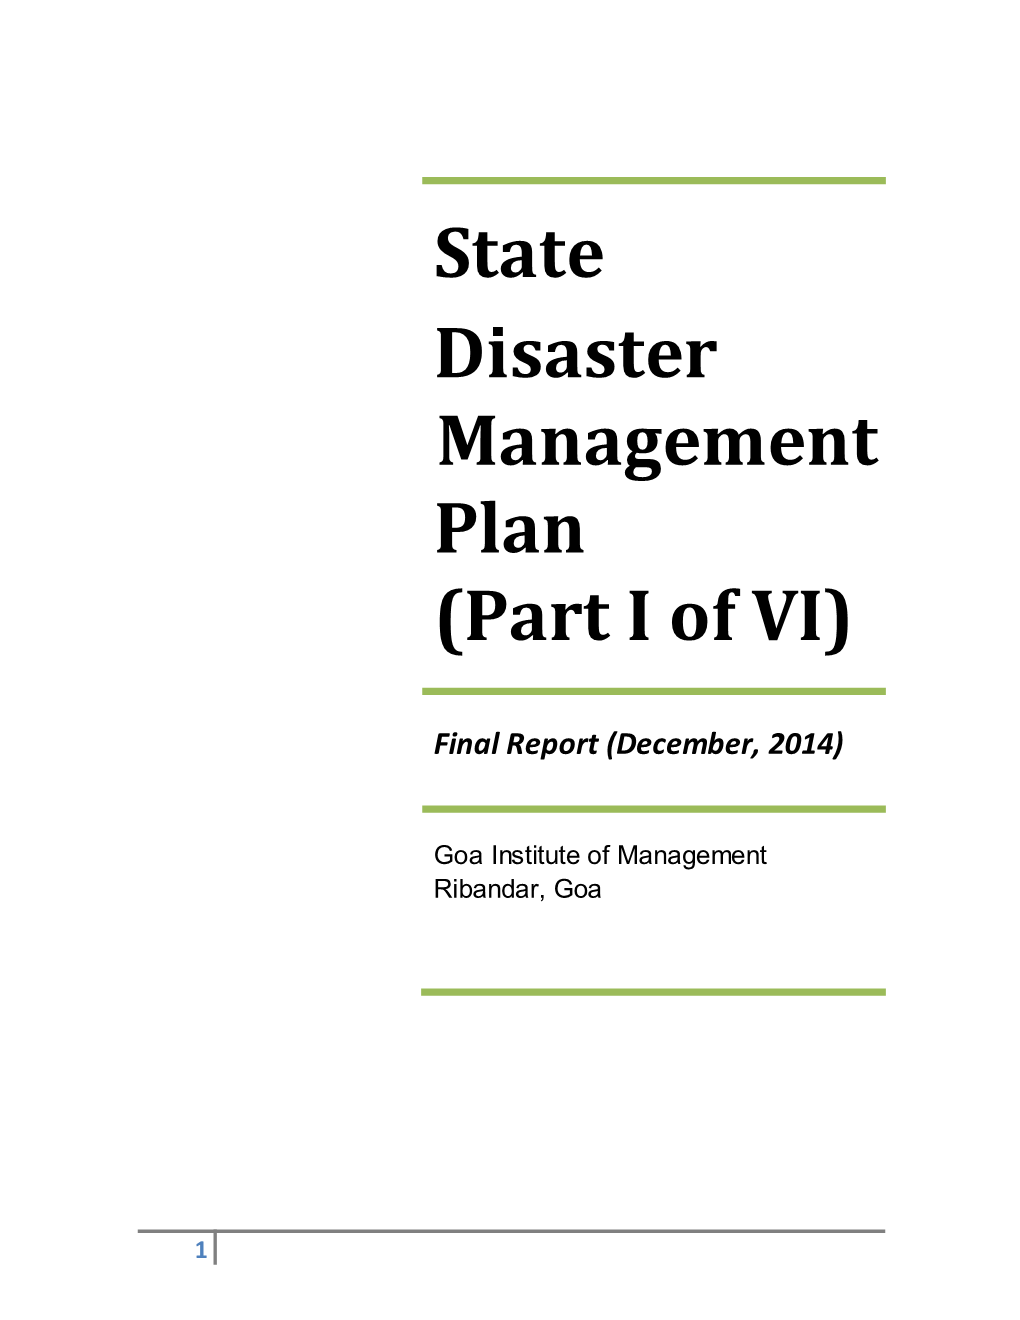 State Disaster Management Plan, Goa, in the Context of Preparedness/ Mitigation, Response & Rehabilitation from Natural and Man-Made Disasters